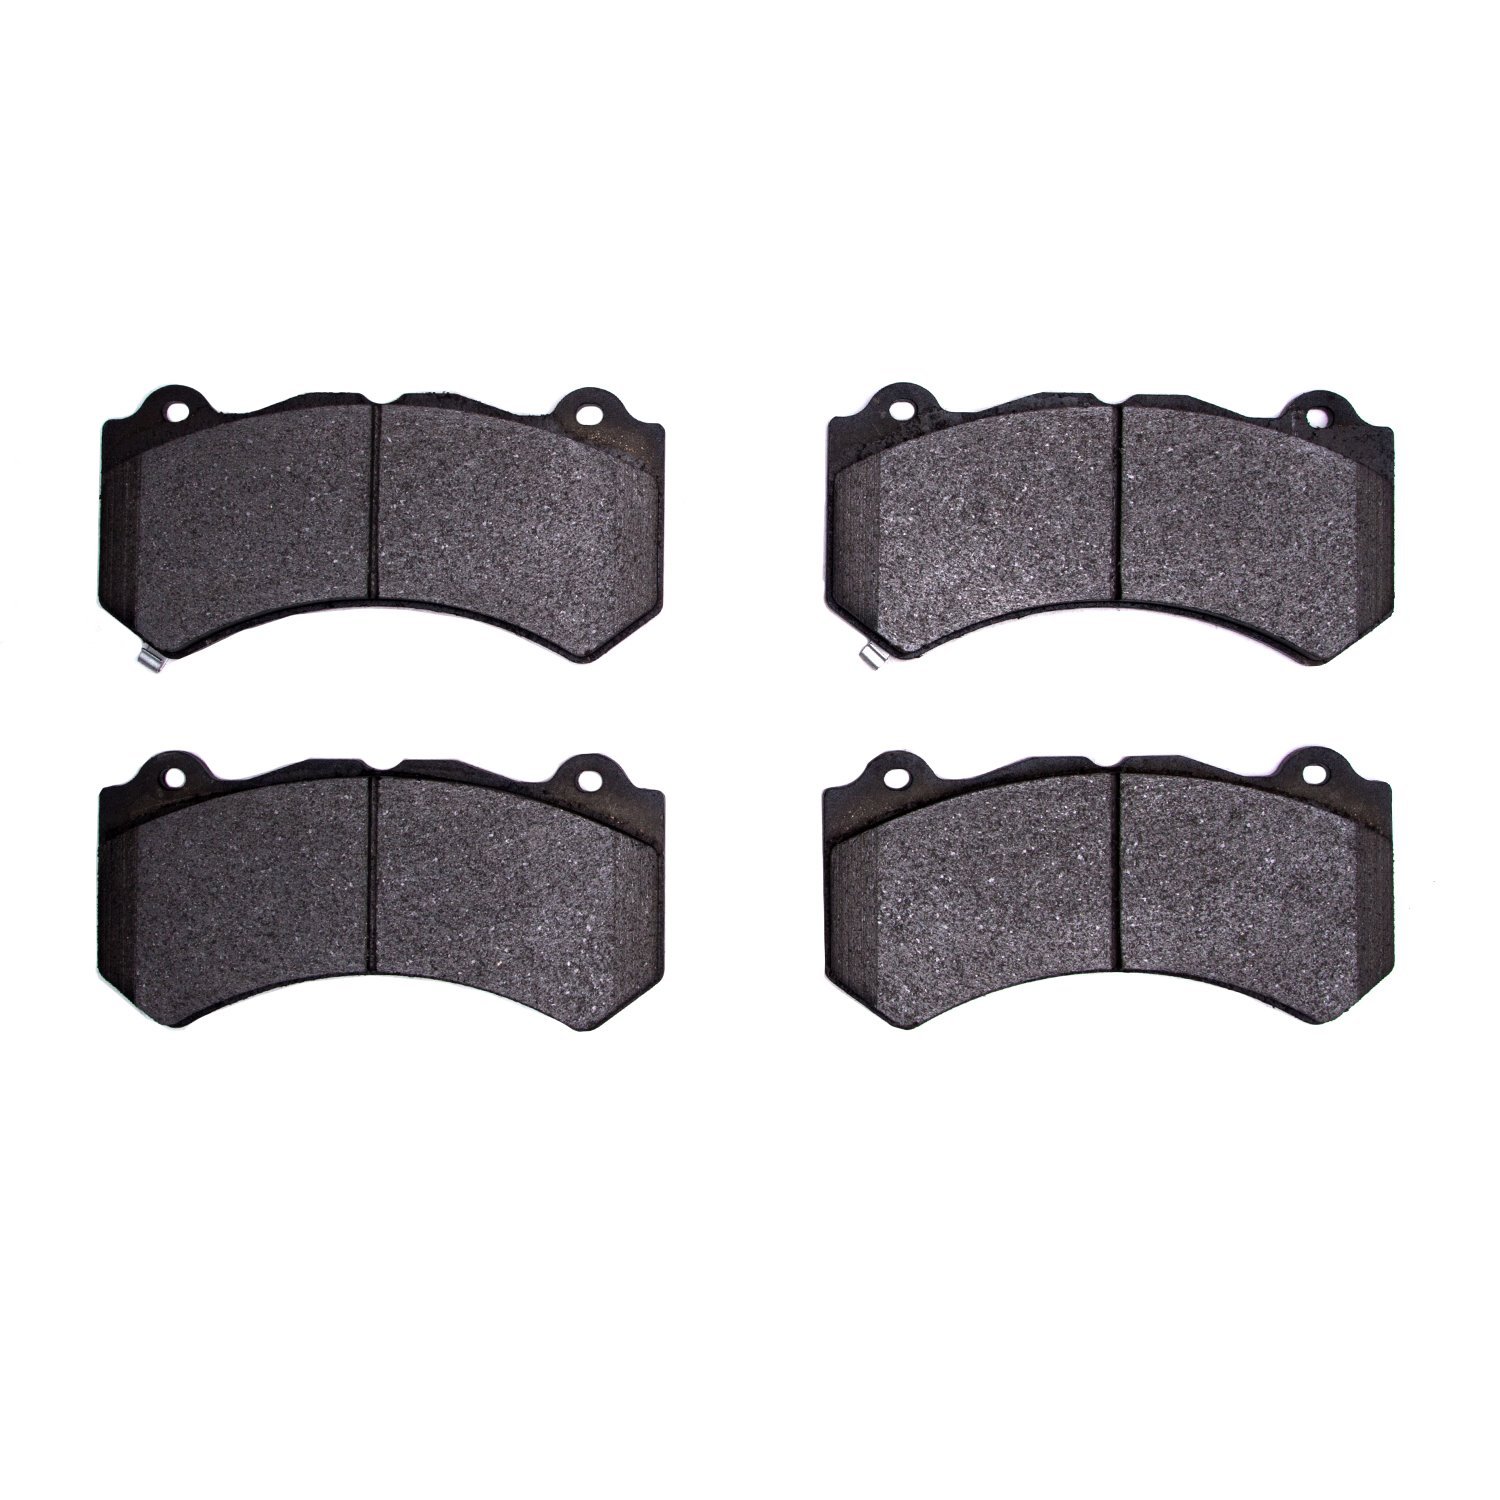 Performance Sport Brake Pads, Fits Select Fits Multiple Makes/Models, Position: Front